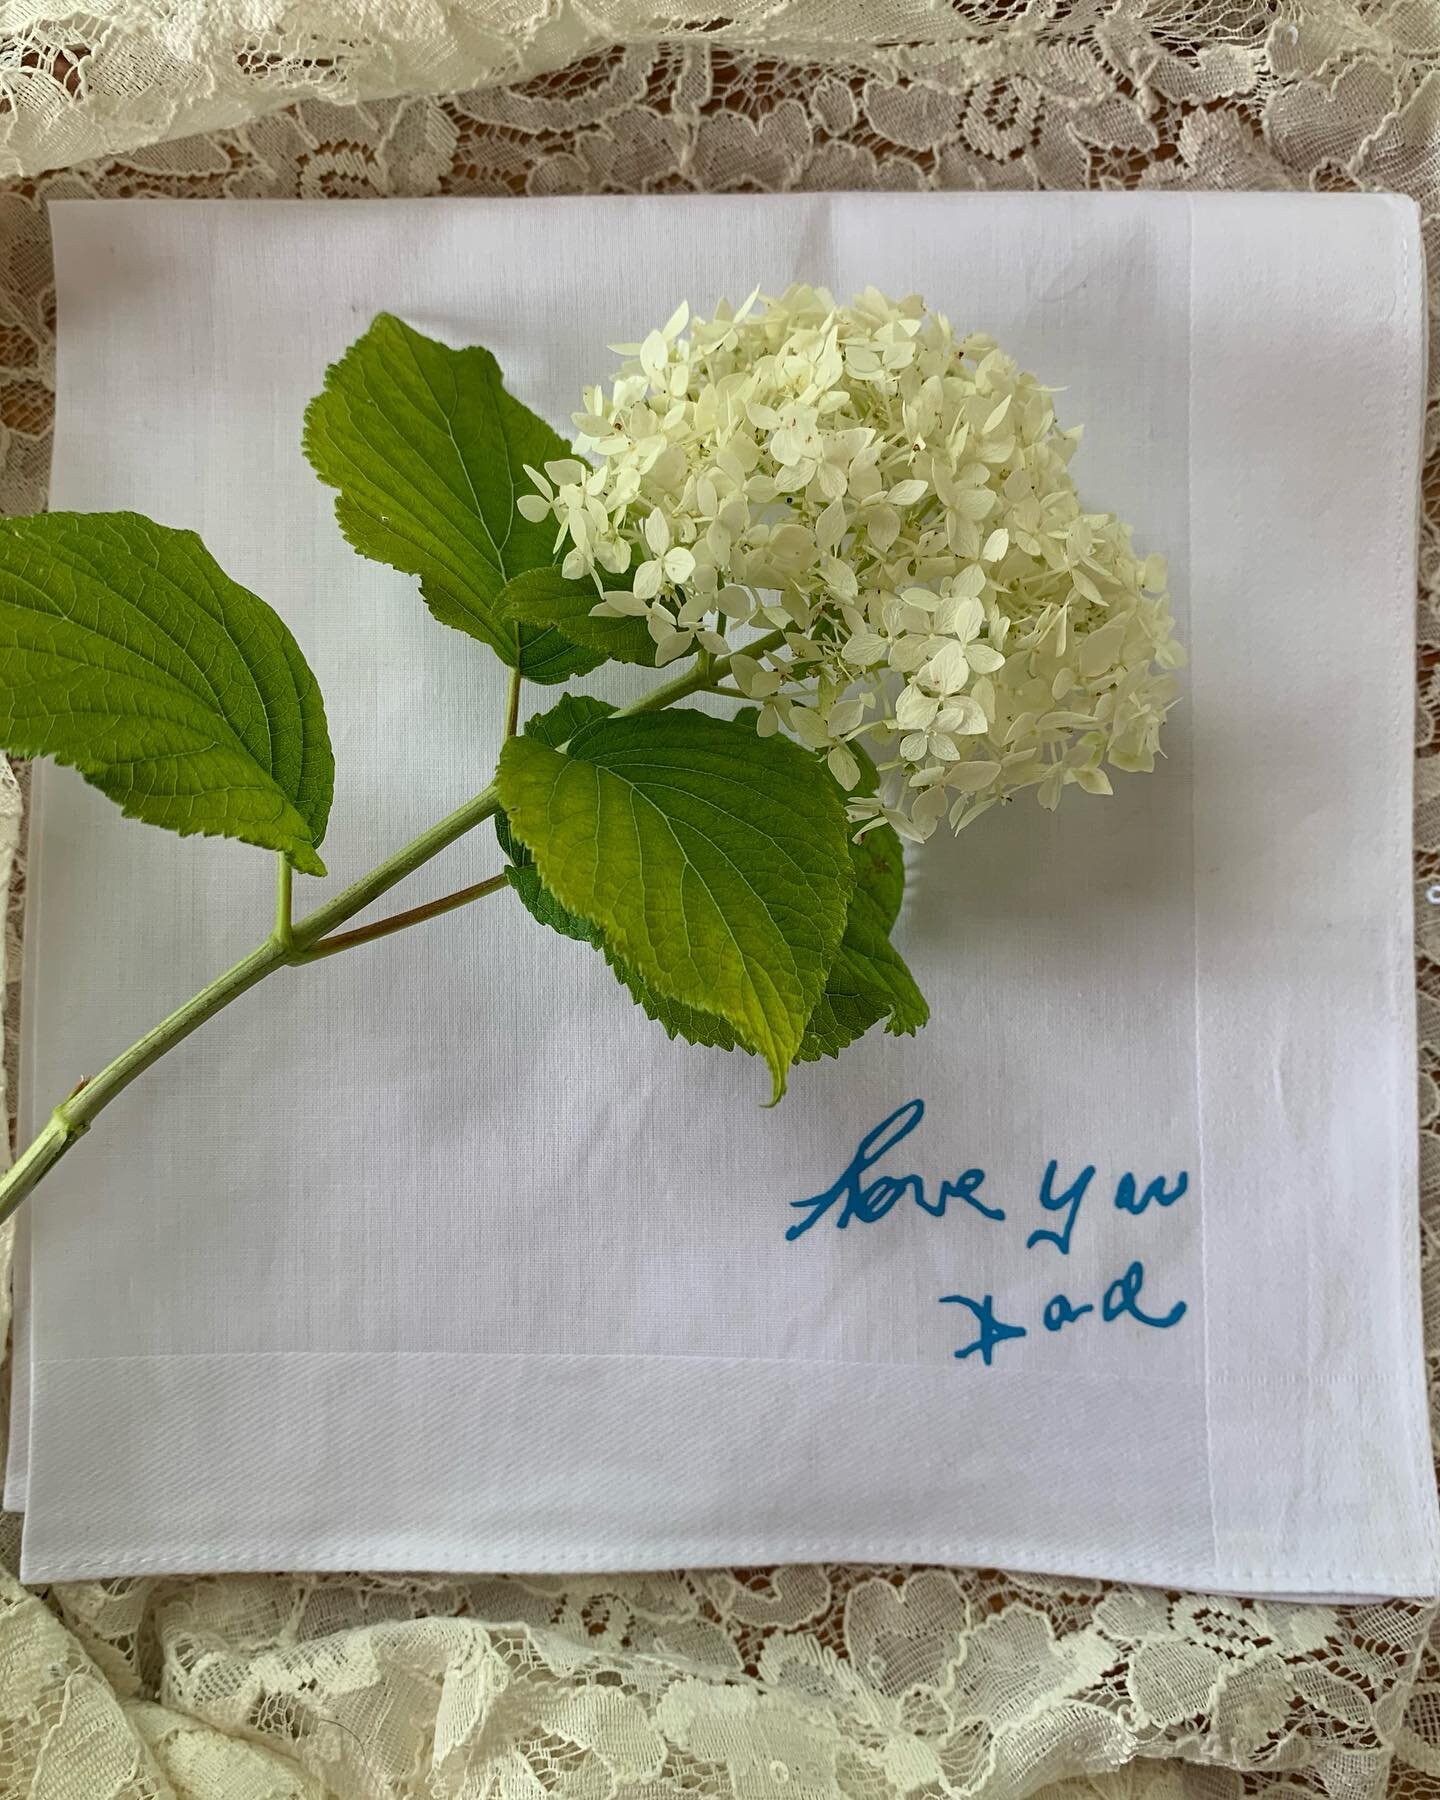 GIVEAWAY:
** Winner has been chosen! 

Something borrowed, something blue, something old, something new.

We are gifting someone with a handwritten handkerchief with your loved ones handwriting. We will work with you in creating this personal handker